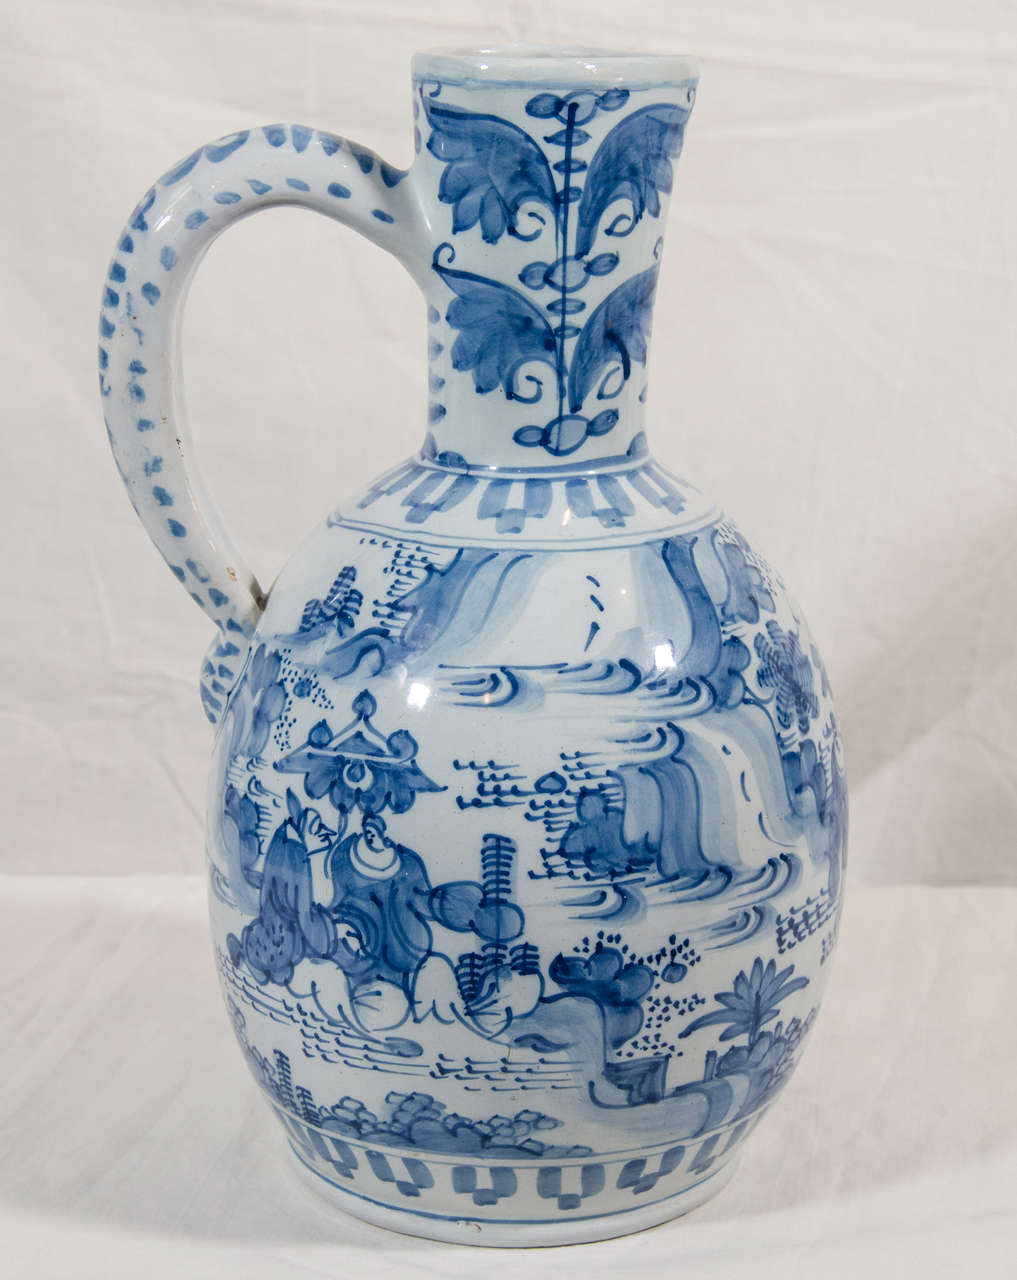 A mid-18th century Frankfurt Delft jug. Decorated all around with chinoiserie garden scenes. Geometric designs incorporating broad flat strokes of dashes and leaves decorate the handle and border.